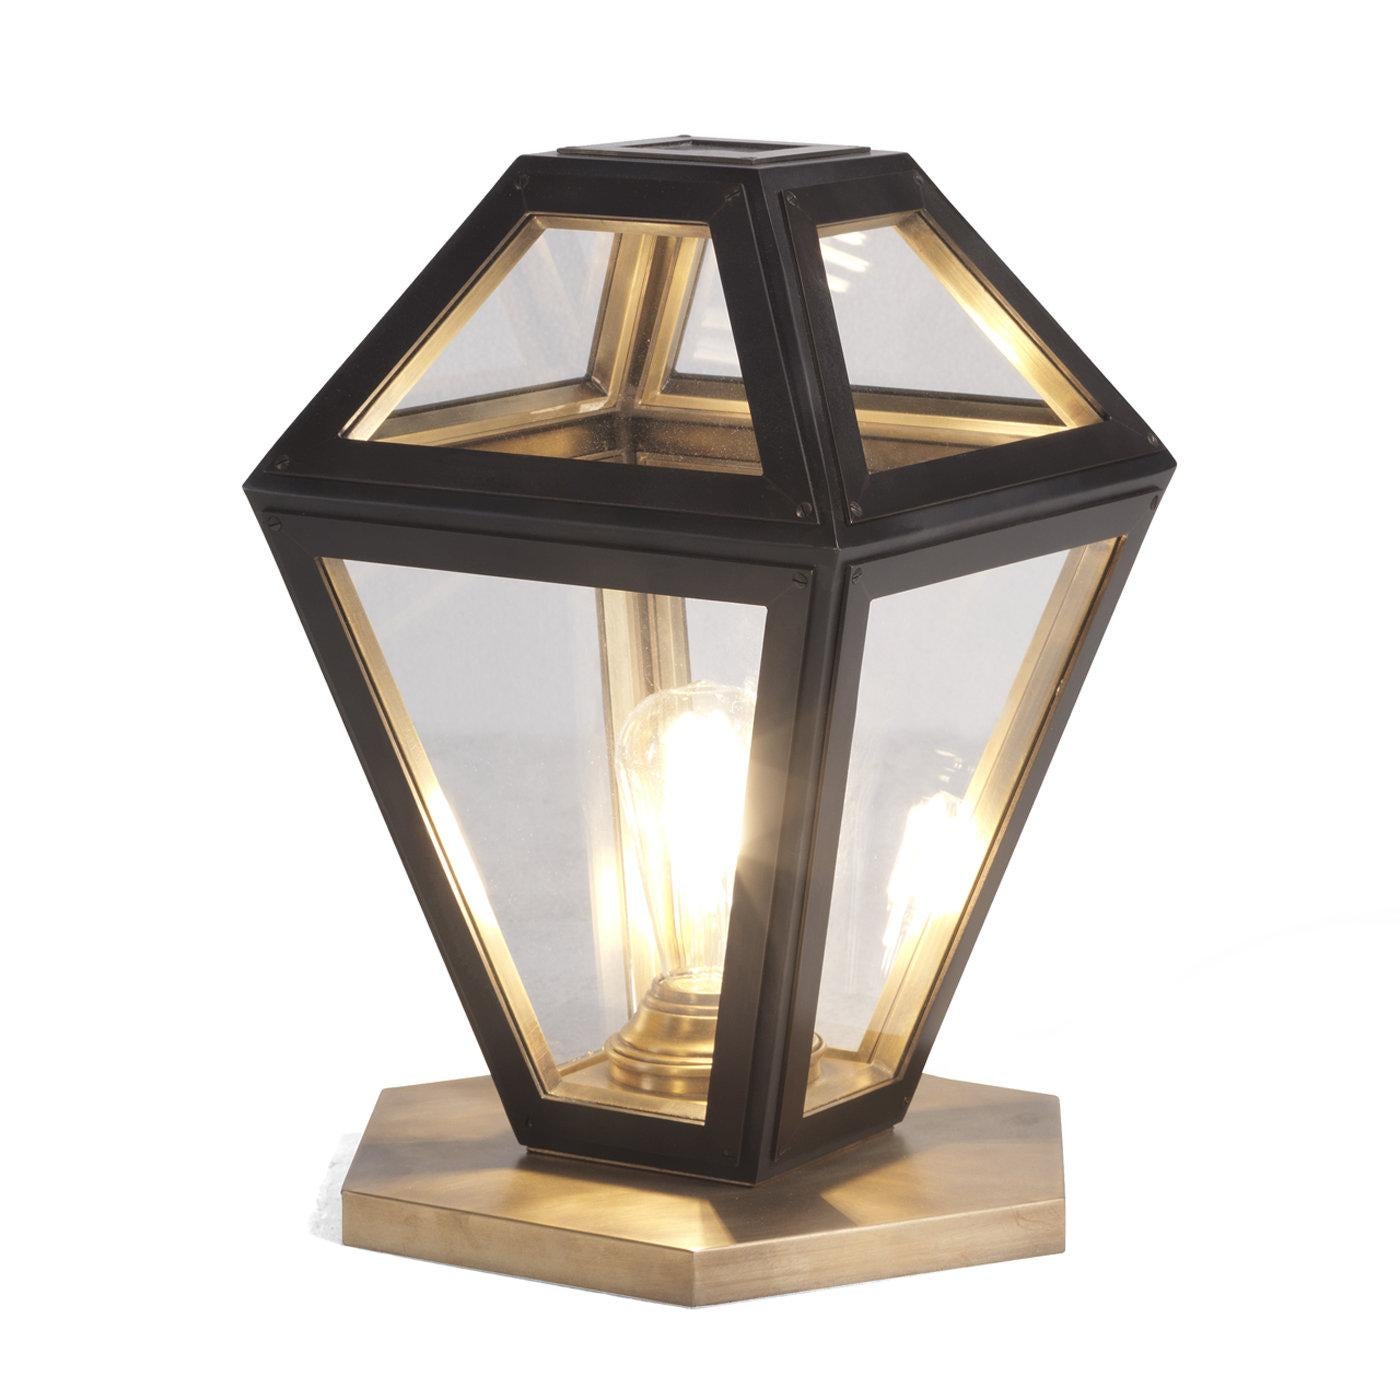 A unique piece of classic sophistication, this table lamp is part of a collection that reproduces the traditional shape of lanterns. Fashioned of brass frame encasing clear glass panels, this piece rests on a hexagonal base that recalls the lantern